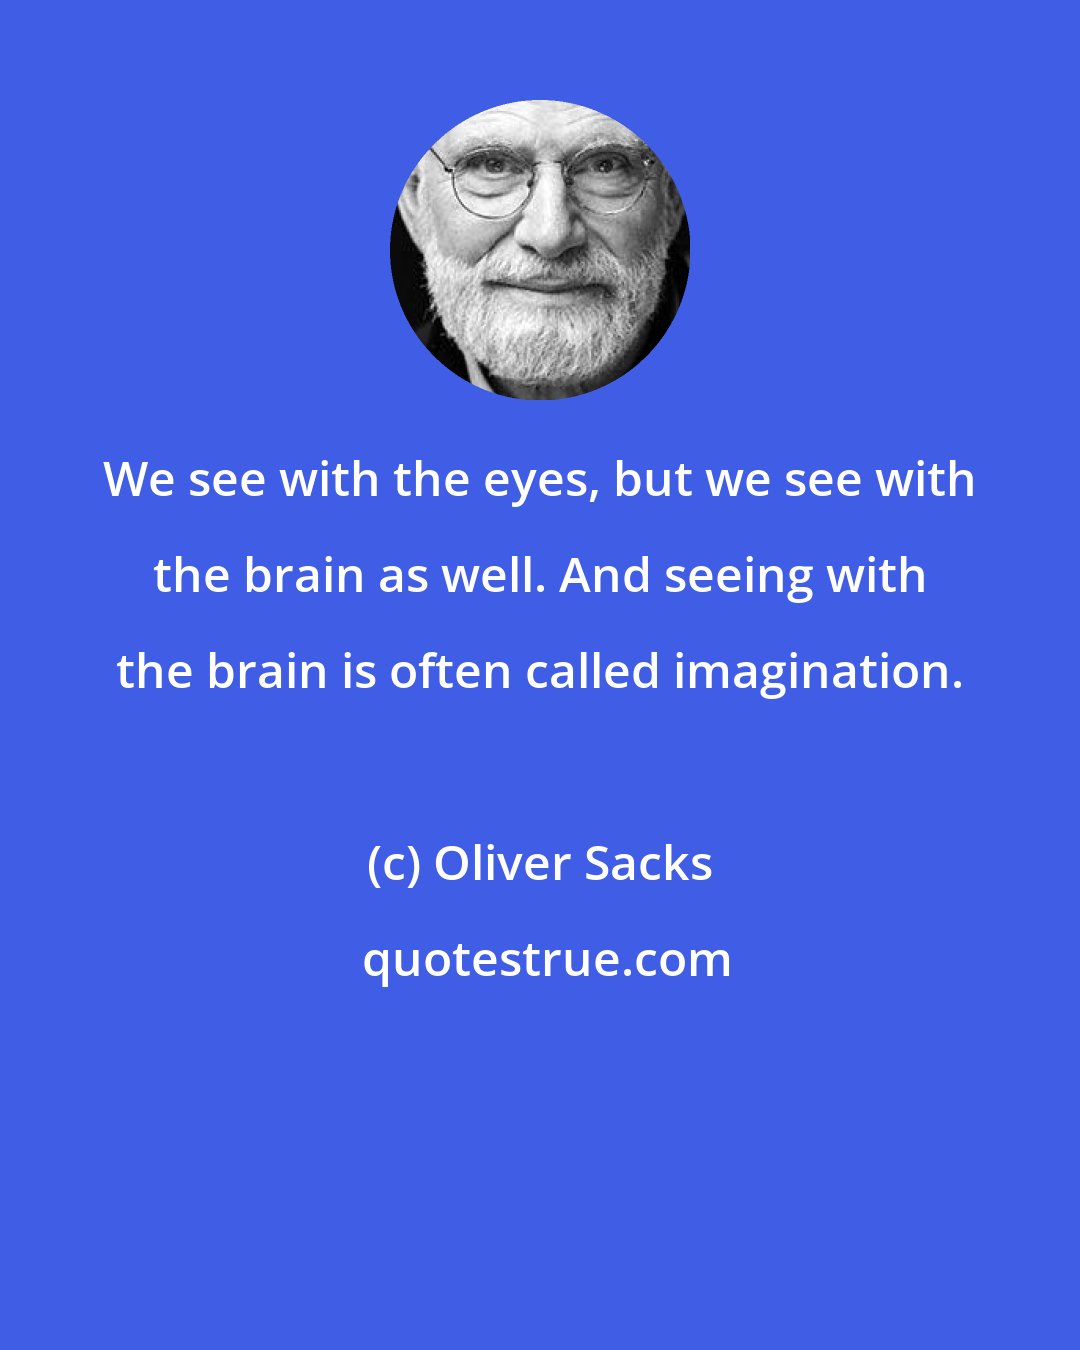 Oliver Sacks: We see with the eyes, but we see with the brain as well. And seeing with the brain is often called imagination.